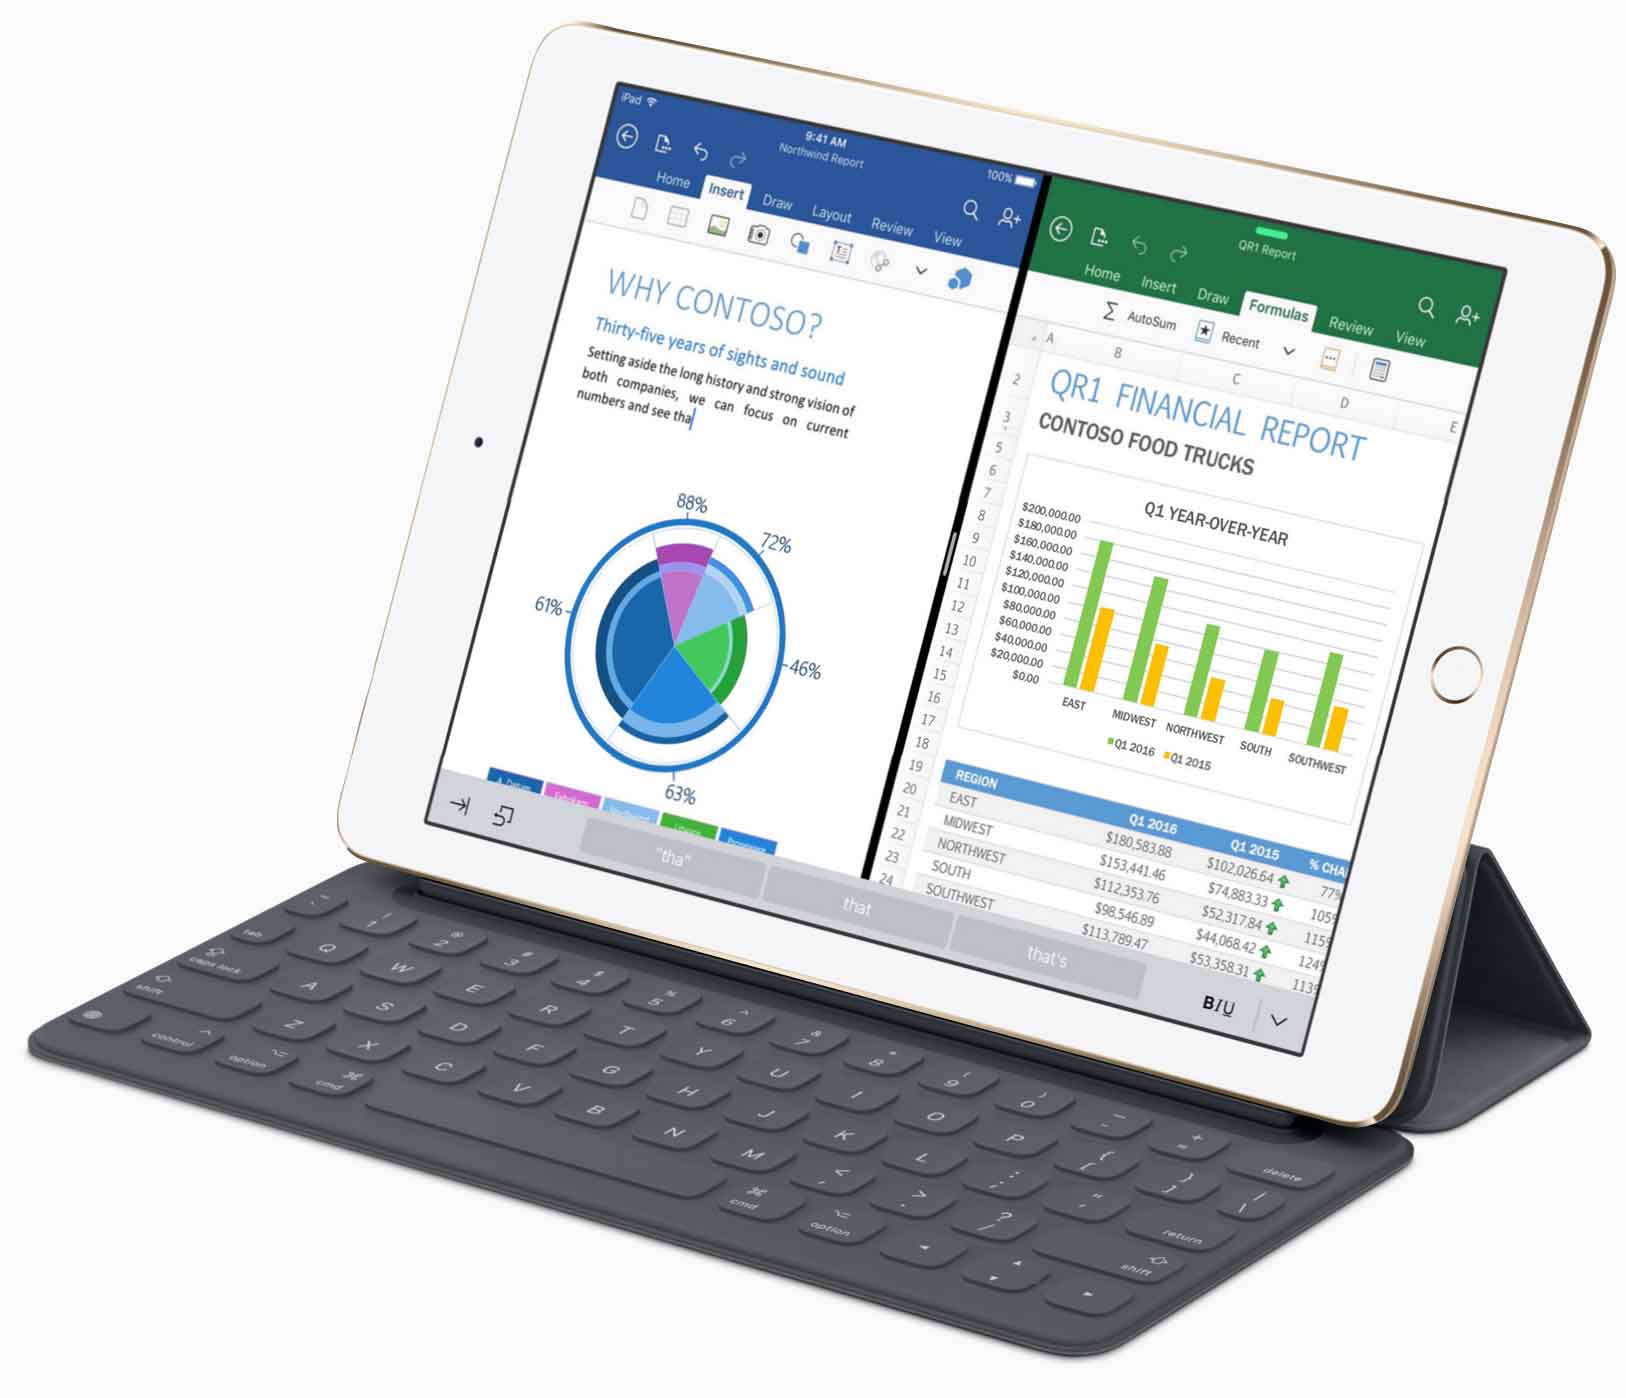 Apple iPad Pro and Keyboard On Sale at PortableOne.com